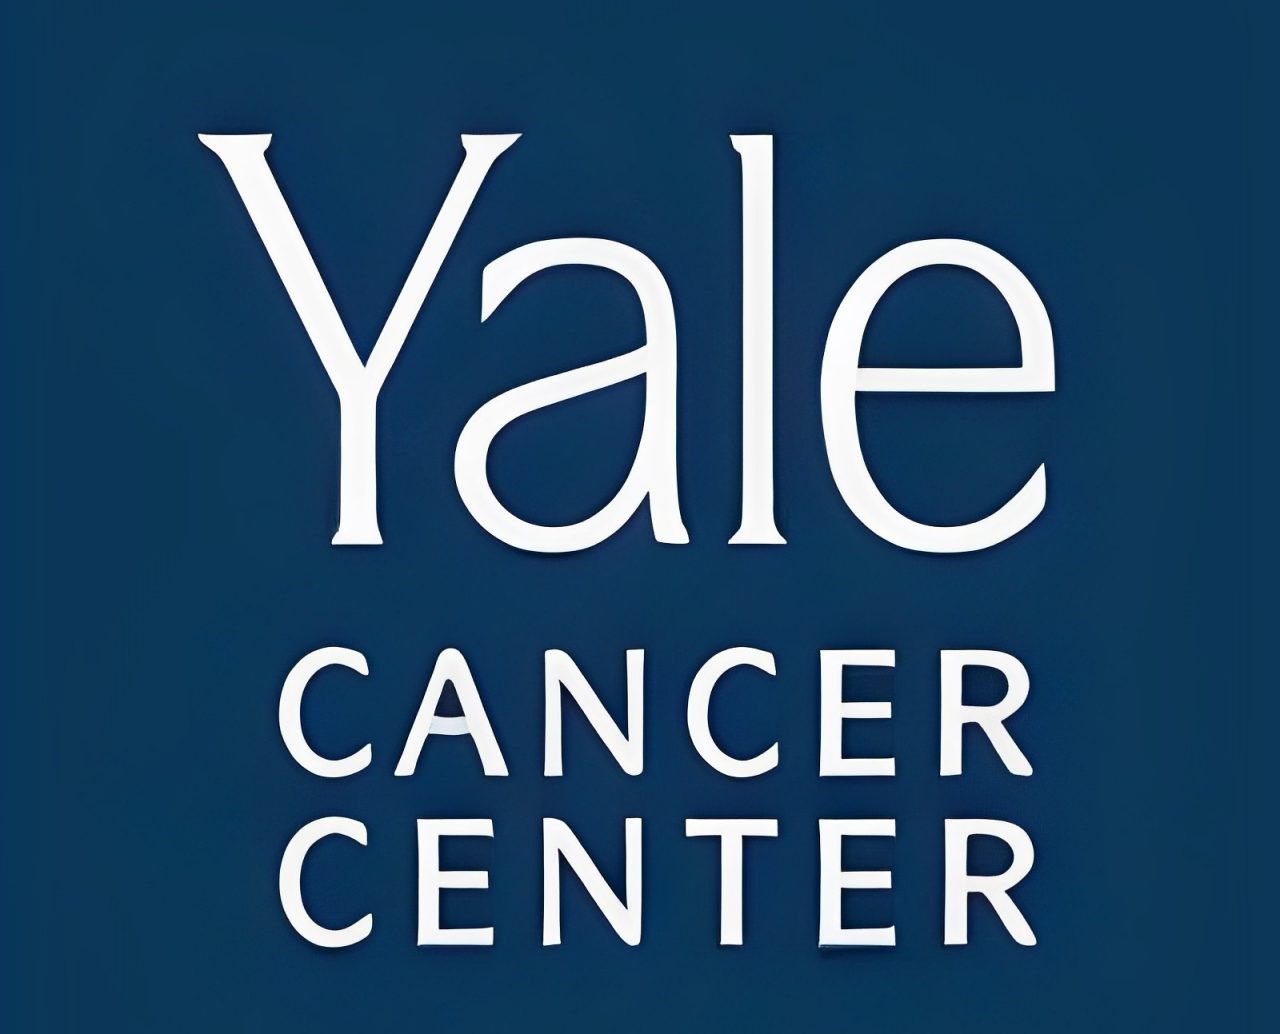 YouTube says it’s now removing videos promoting cancer misinformation – Yale Cancer Center